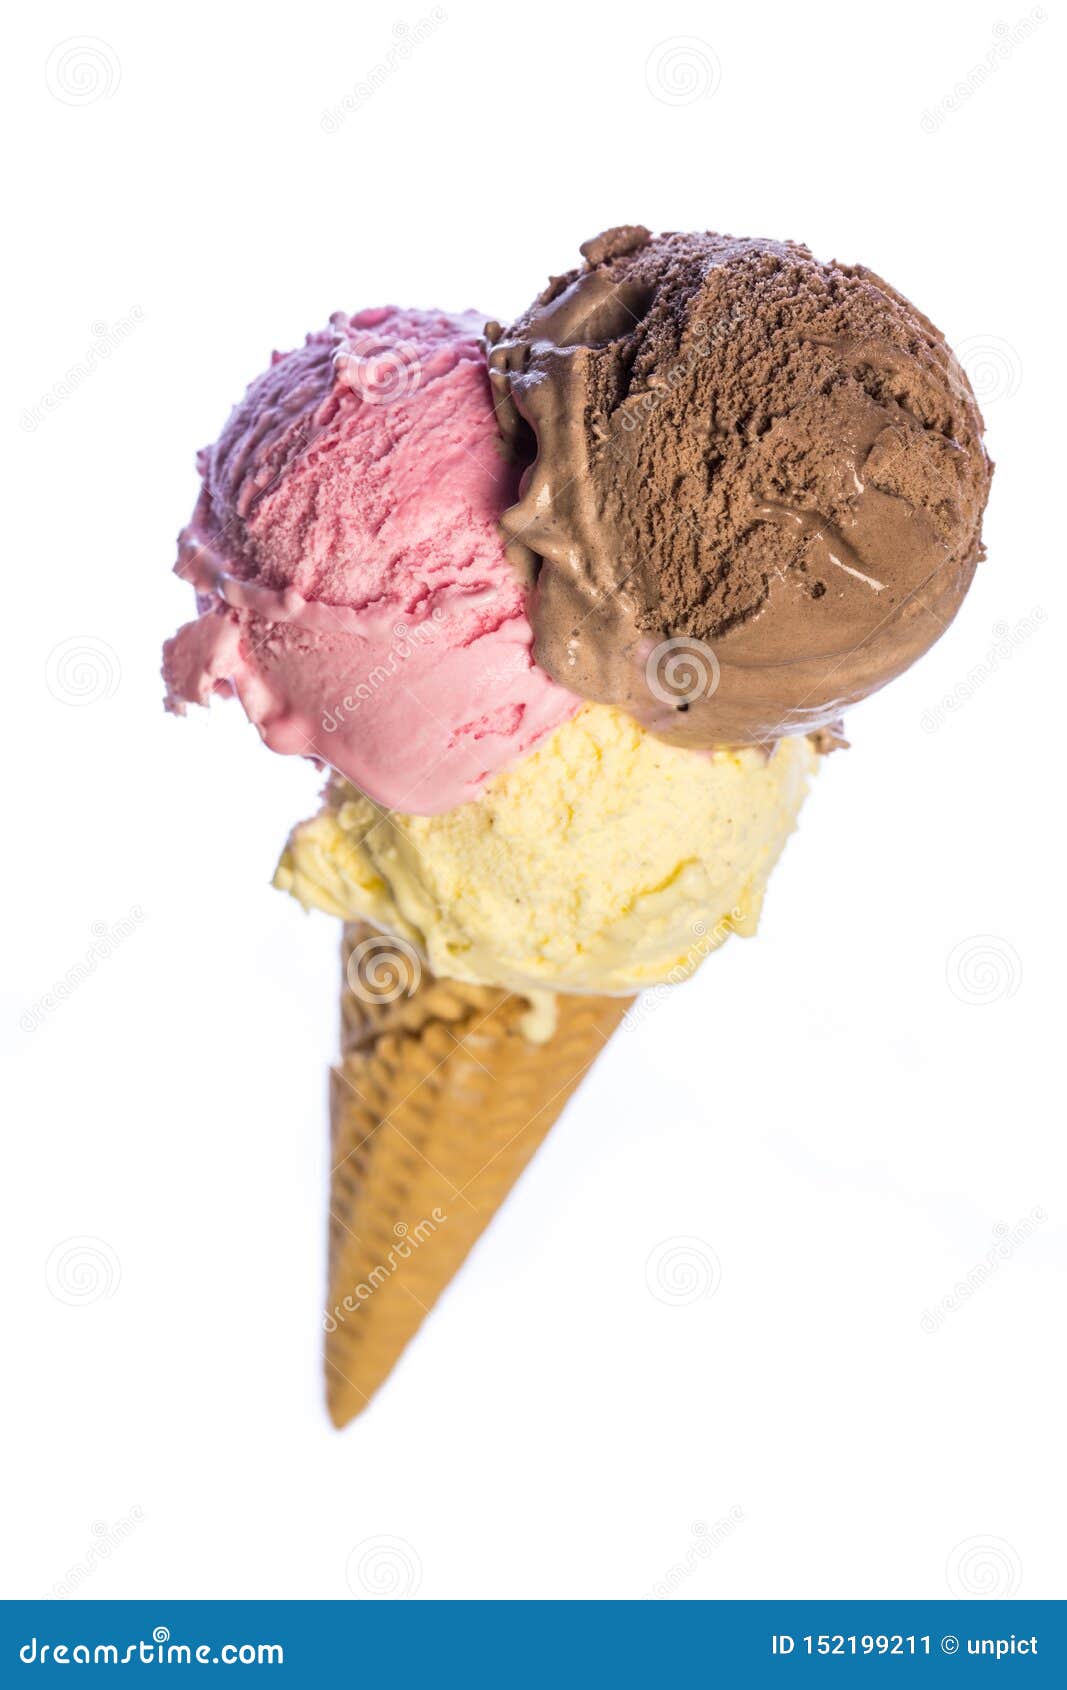 https://thumbs.dreamstime.com/z/ice-cream-scoops-sweet-vanilla-chocolate-strawberry-isolated-white-cone-food-background-red-balls-ball-real-three-152199211.jpg